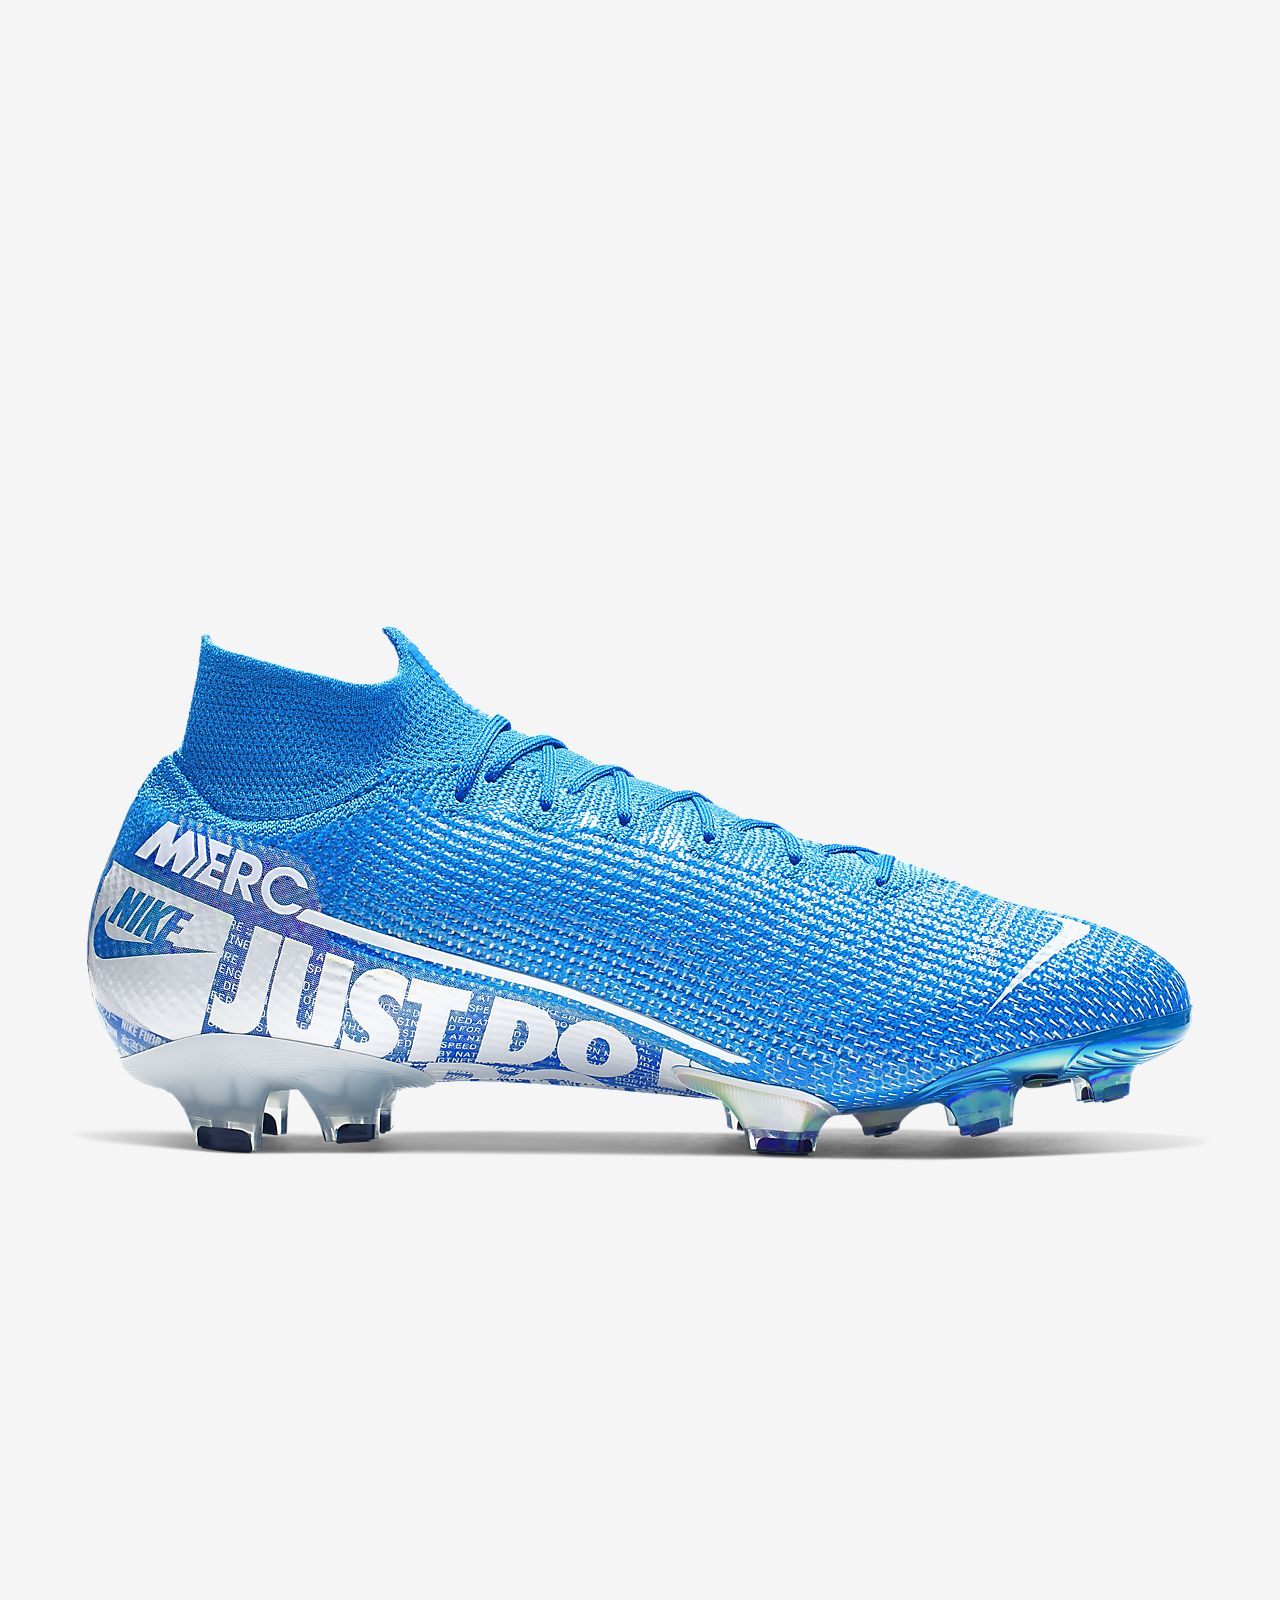 Football Boots Nike Mercurial Superfly VI Elite CR7 Special.